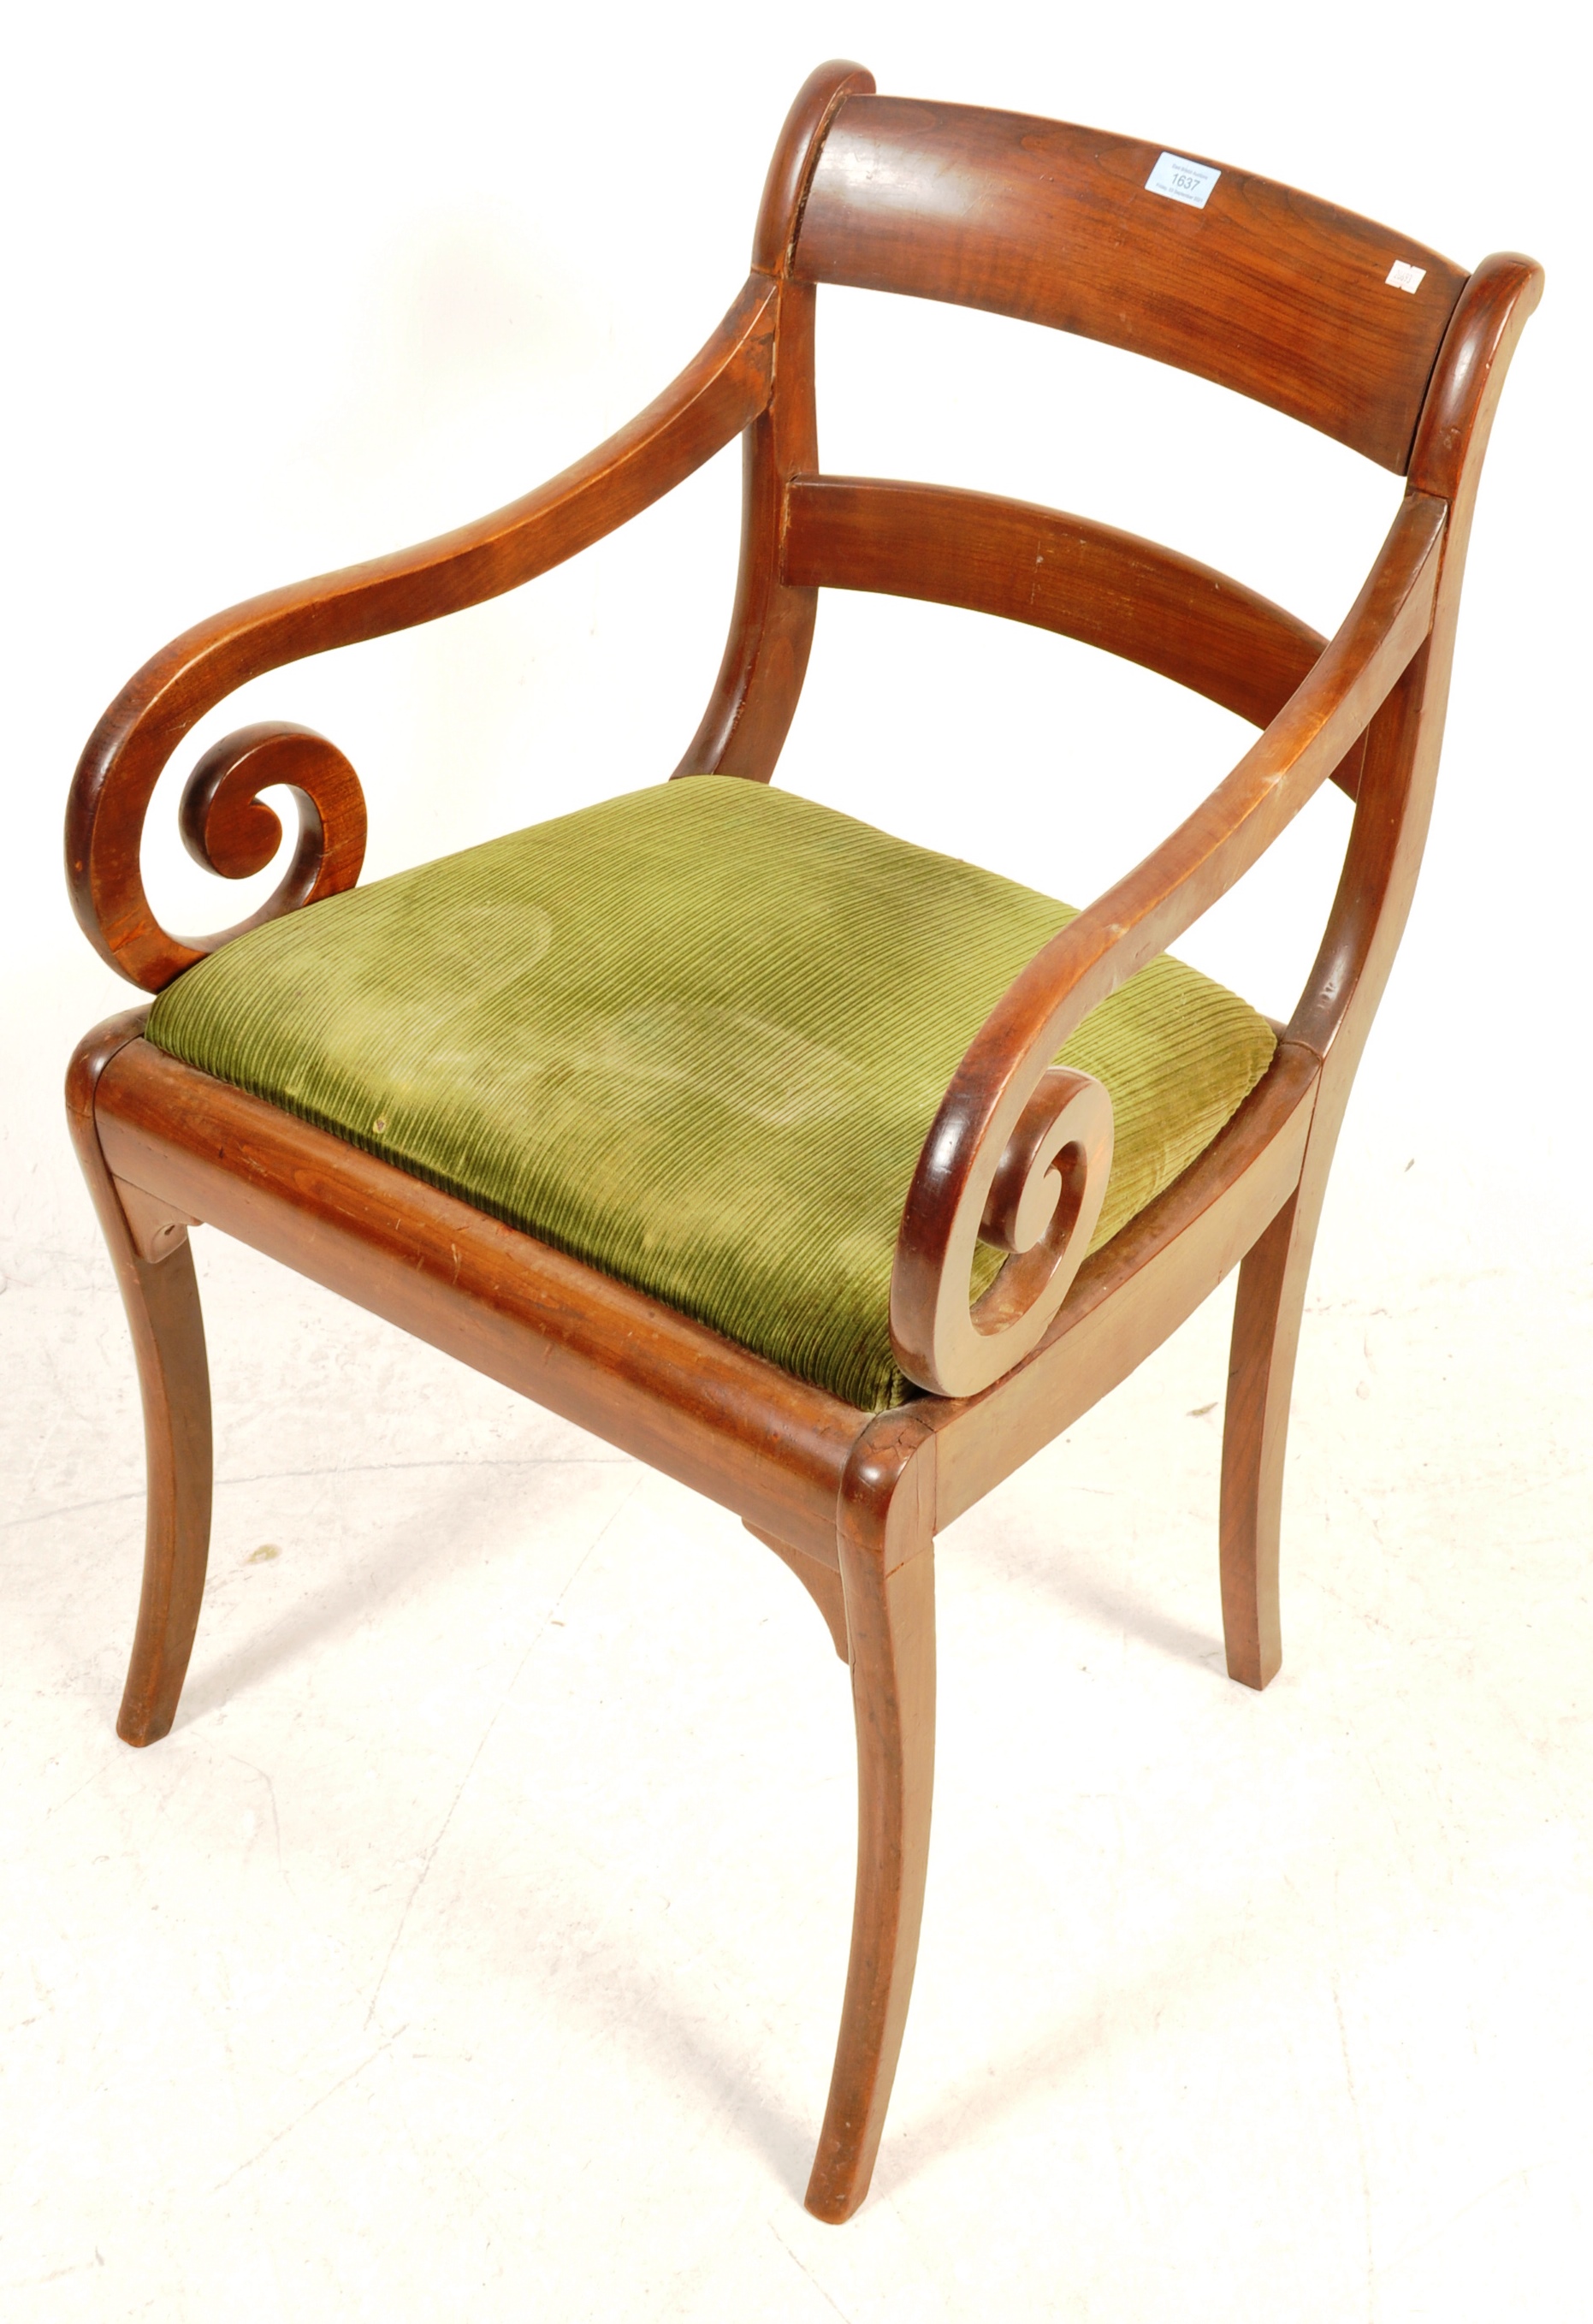 EARLY 19TH CENTURY REGENCY MAHOGANY SCROLLED ARM CHAIR - Image 3 of 8